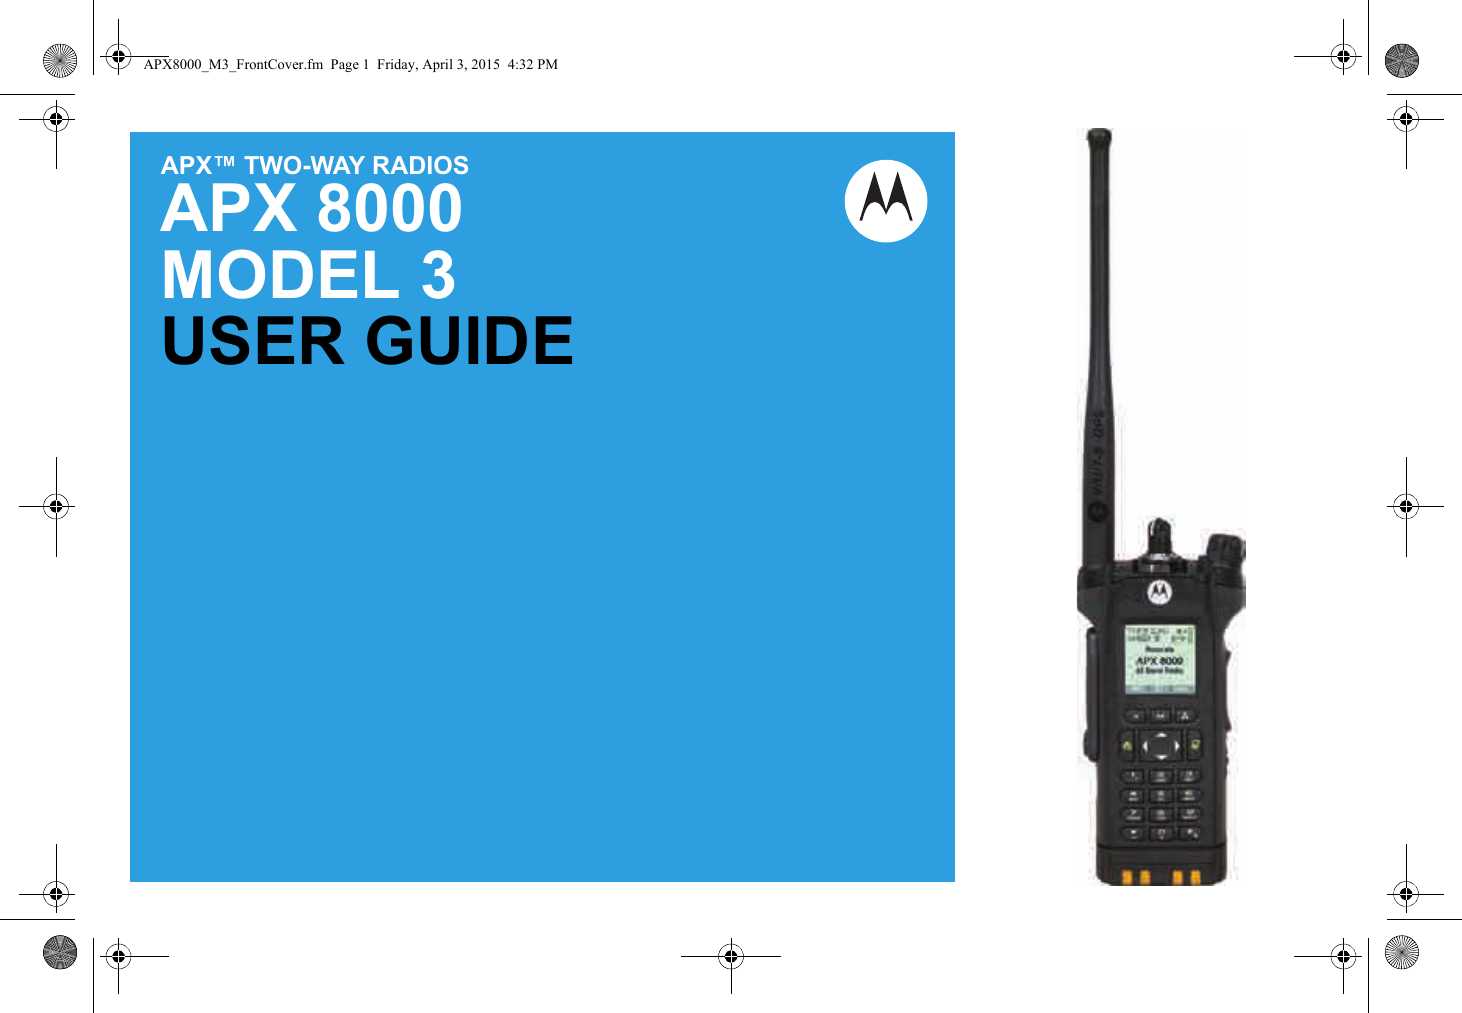 APX™ TWO-WAY RADIOSAPX 8000 MODEL 3USER GUIDEAPX8000_M3_FrontCover.fm  Page 1  Friday, April 3, 2015  4:32 PM